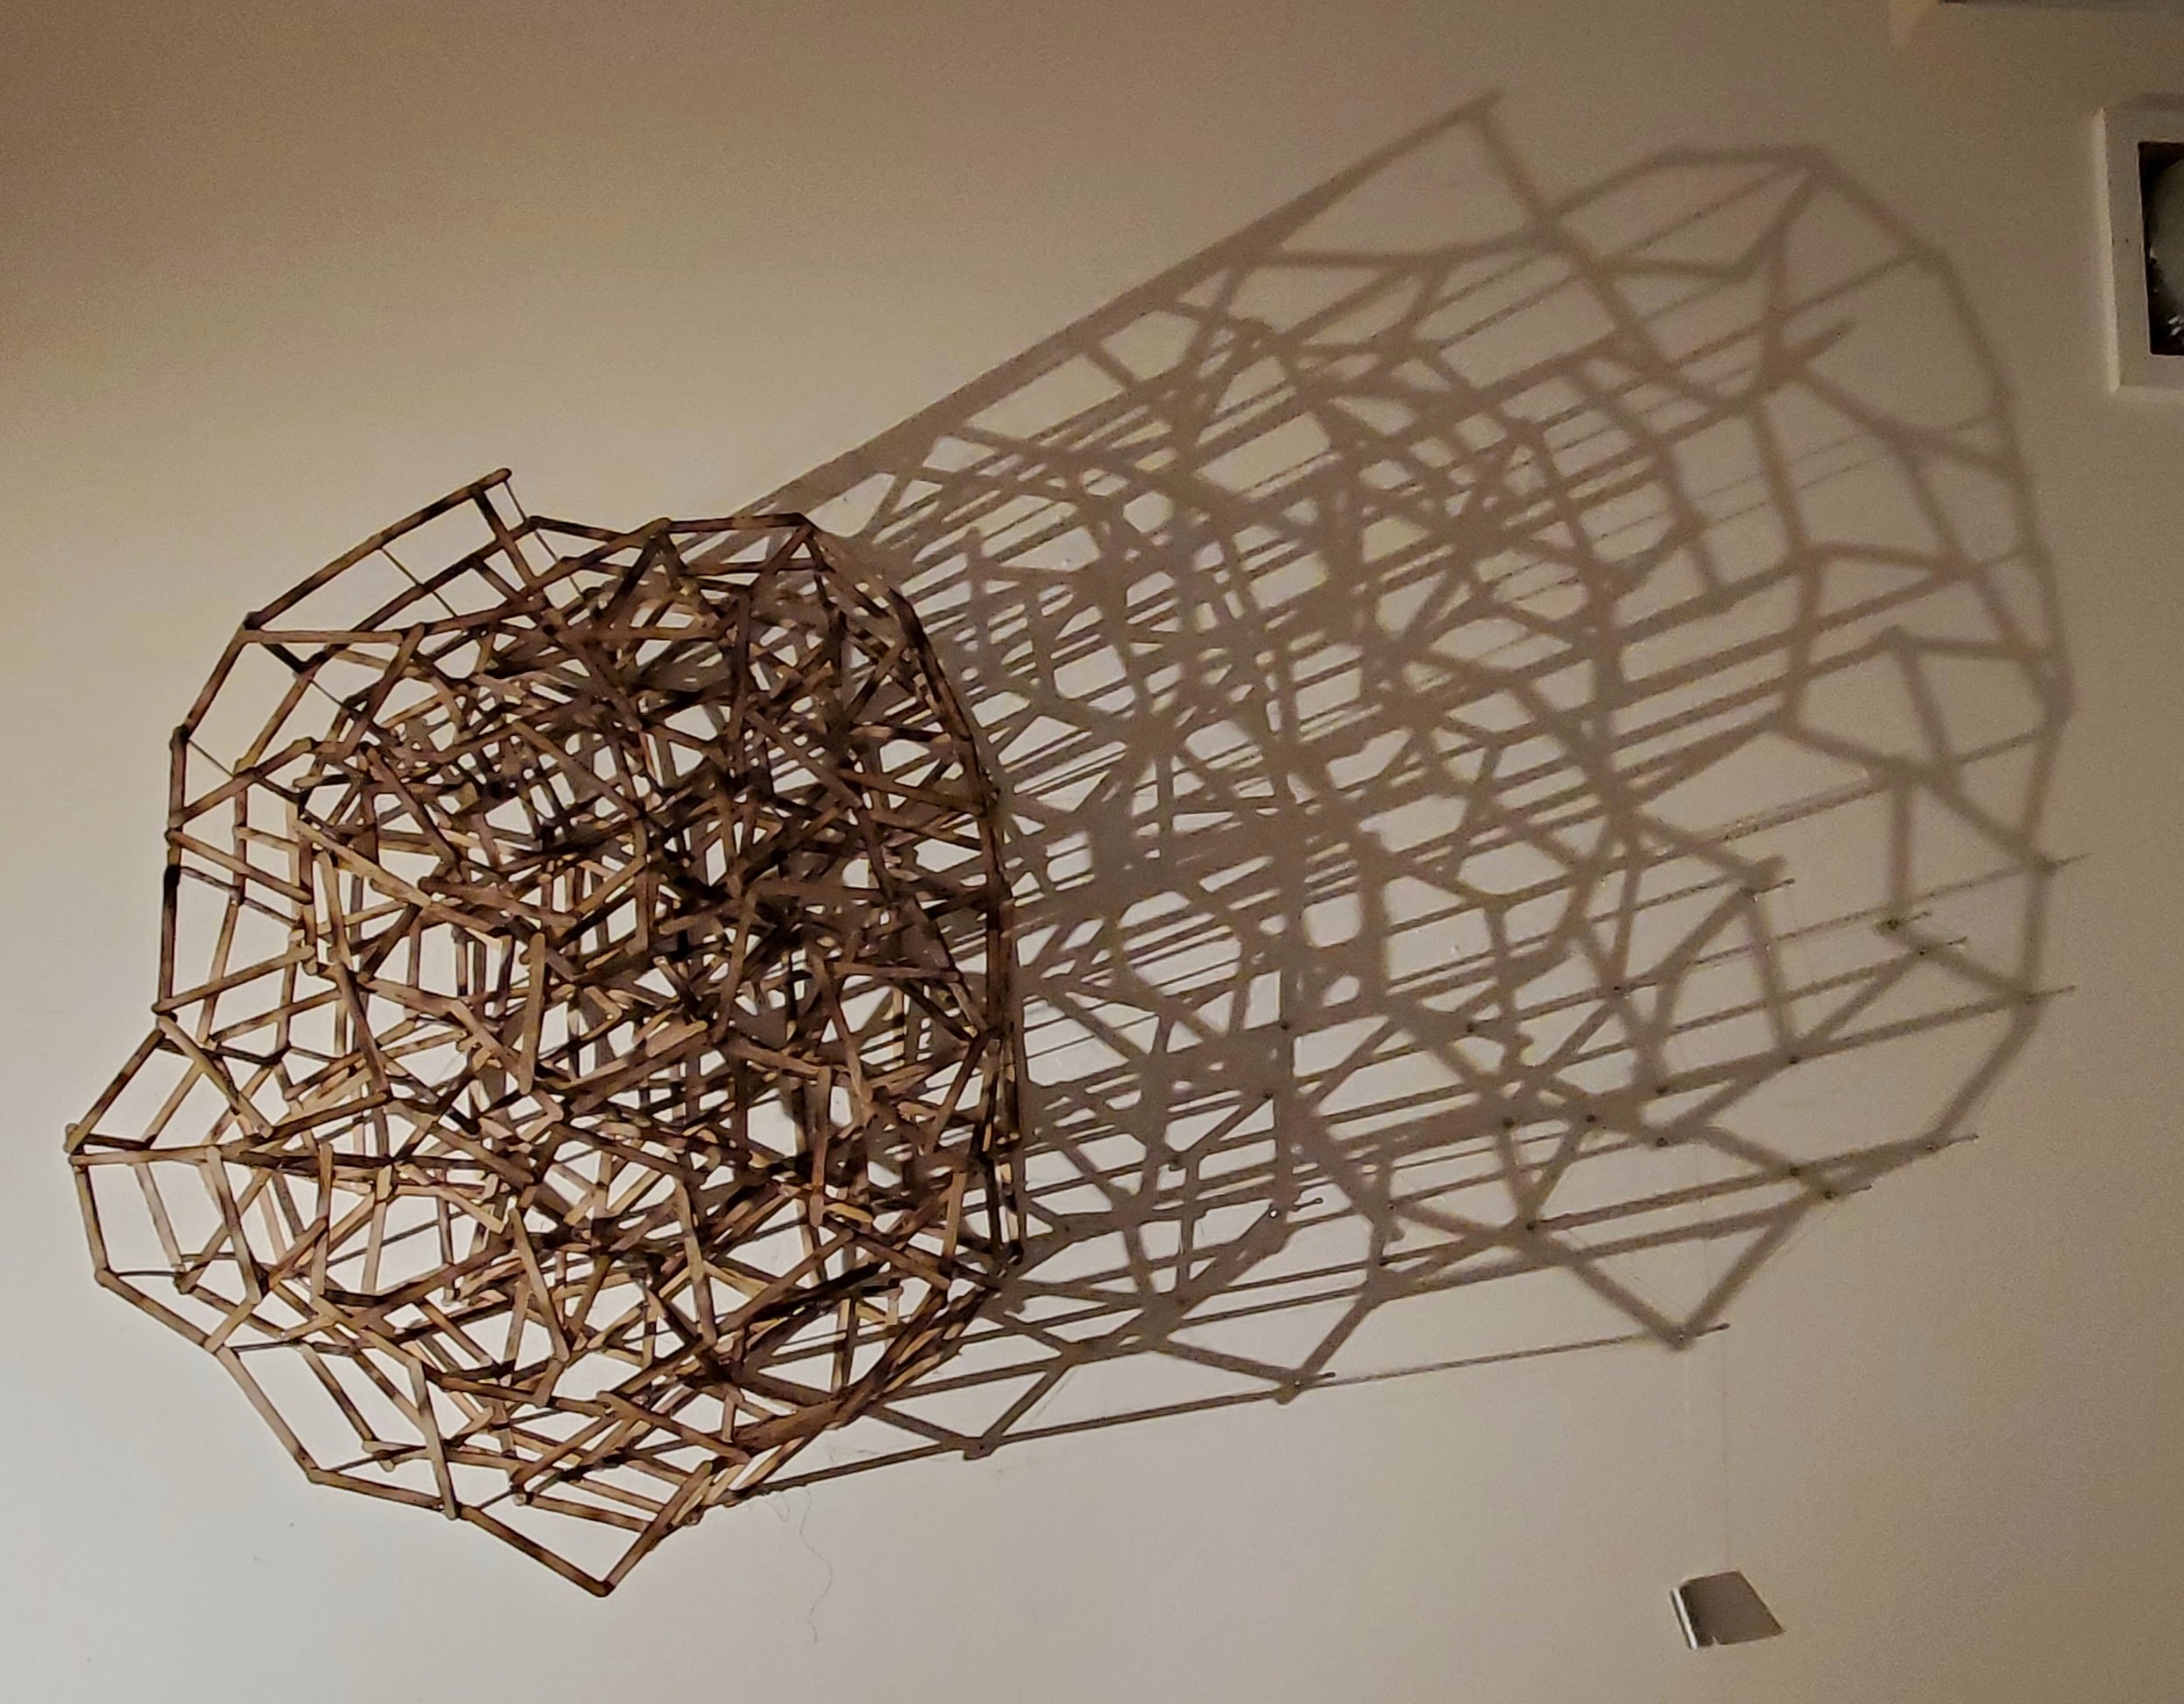 mapping her heartbeat, popsicle sticks, hot glue, shadow, thread, push pins, 32"x40"x10"d. (Study)